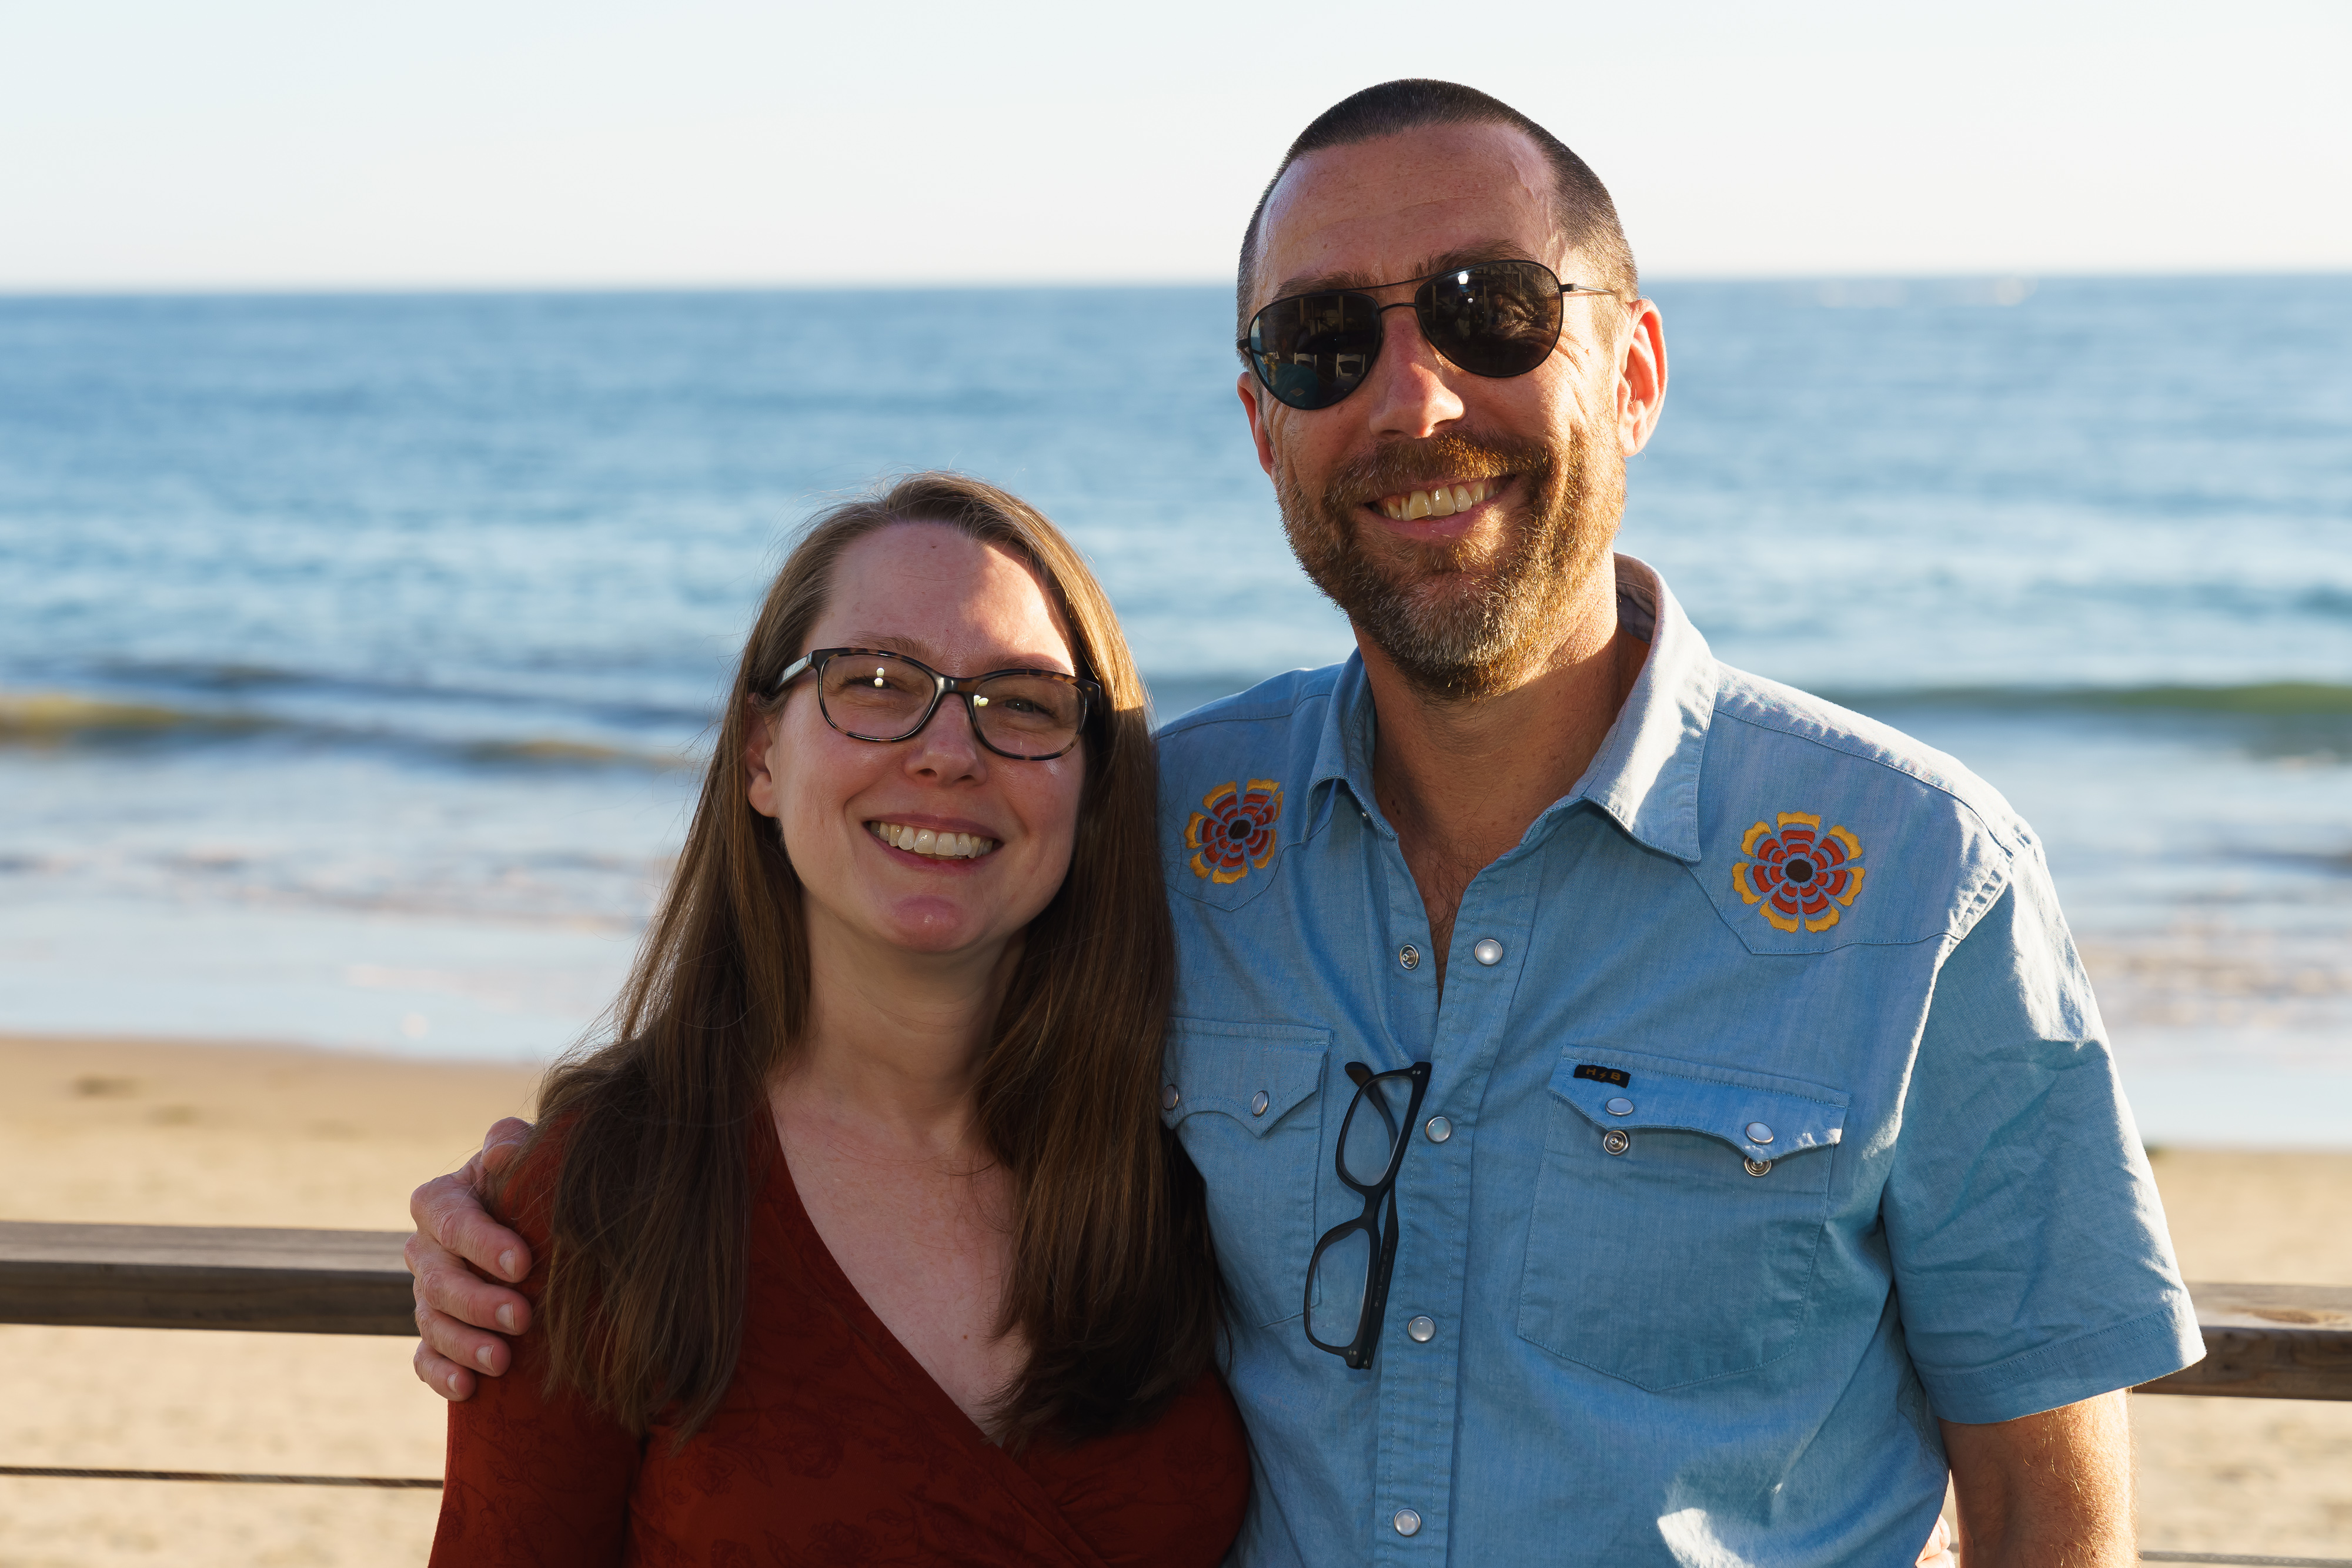 Dean Egerstedt with his wife, Danielle Hanson, on the beach in Crystal Cove (Photo: Crystal Cove Conservancy)